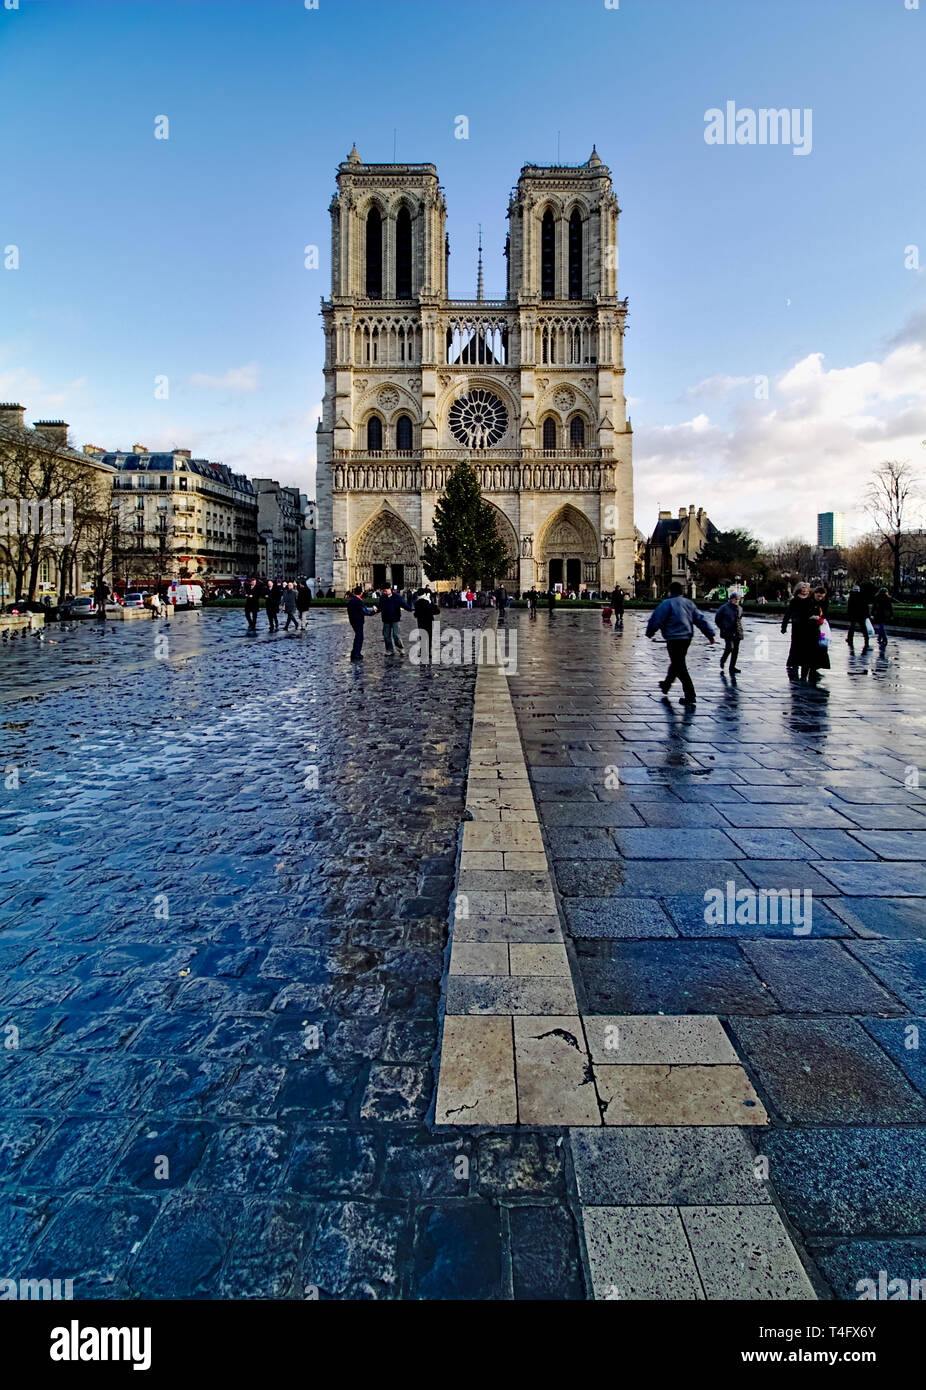 Notre Dame De Paris Cathedral France Winter Blue Sky With Some Clouds